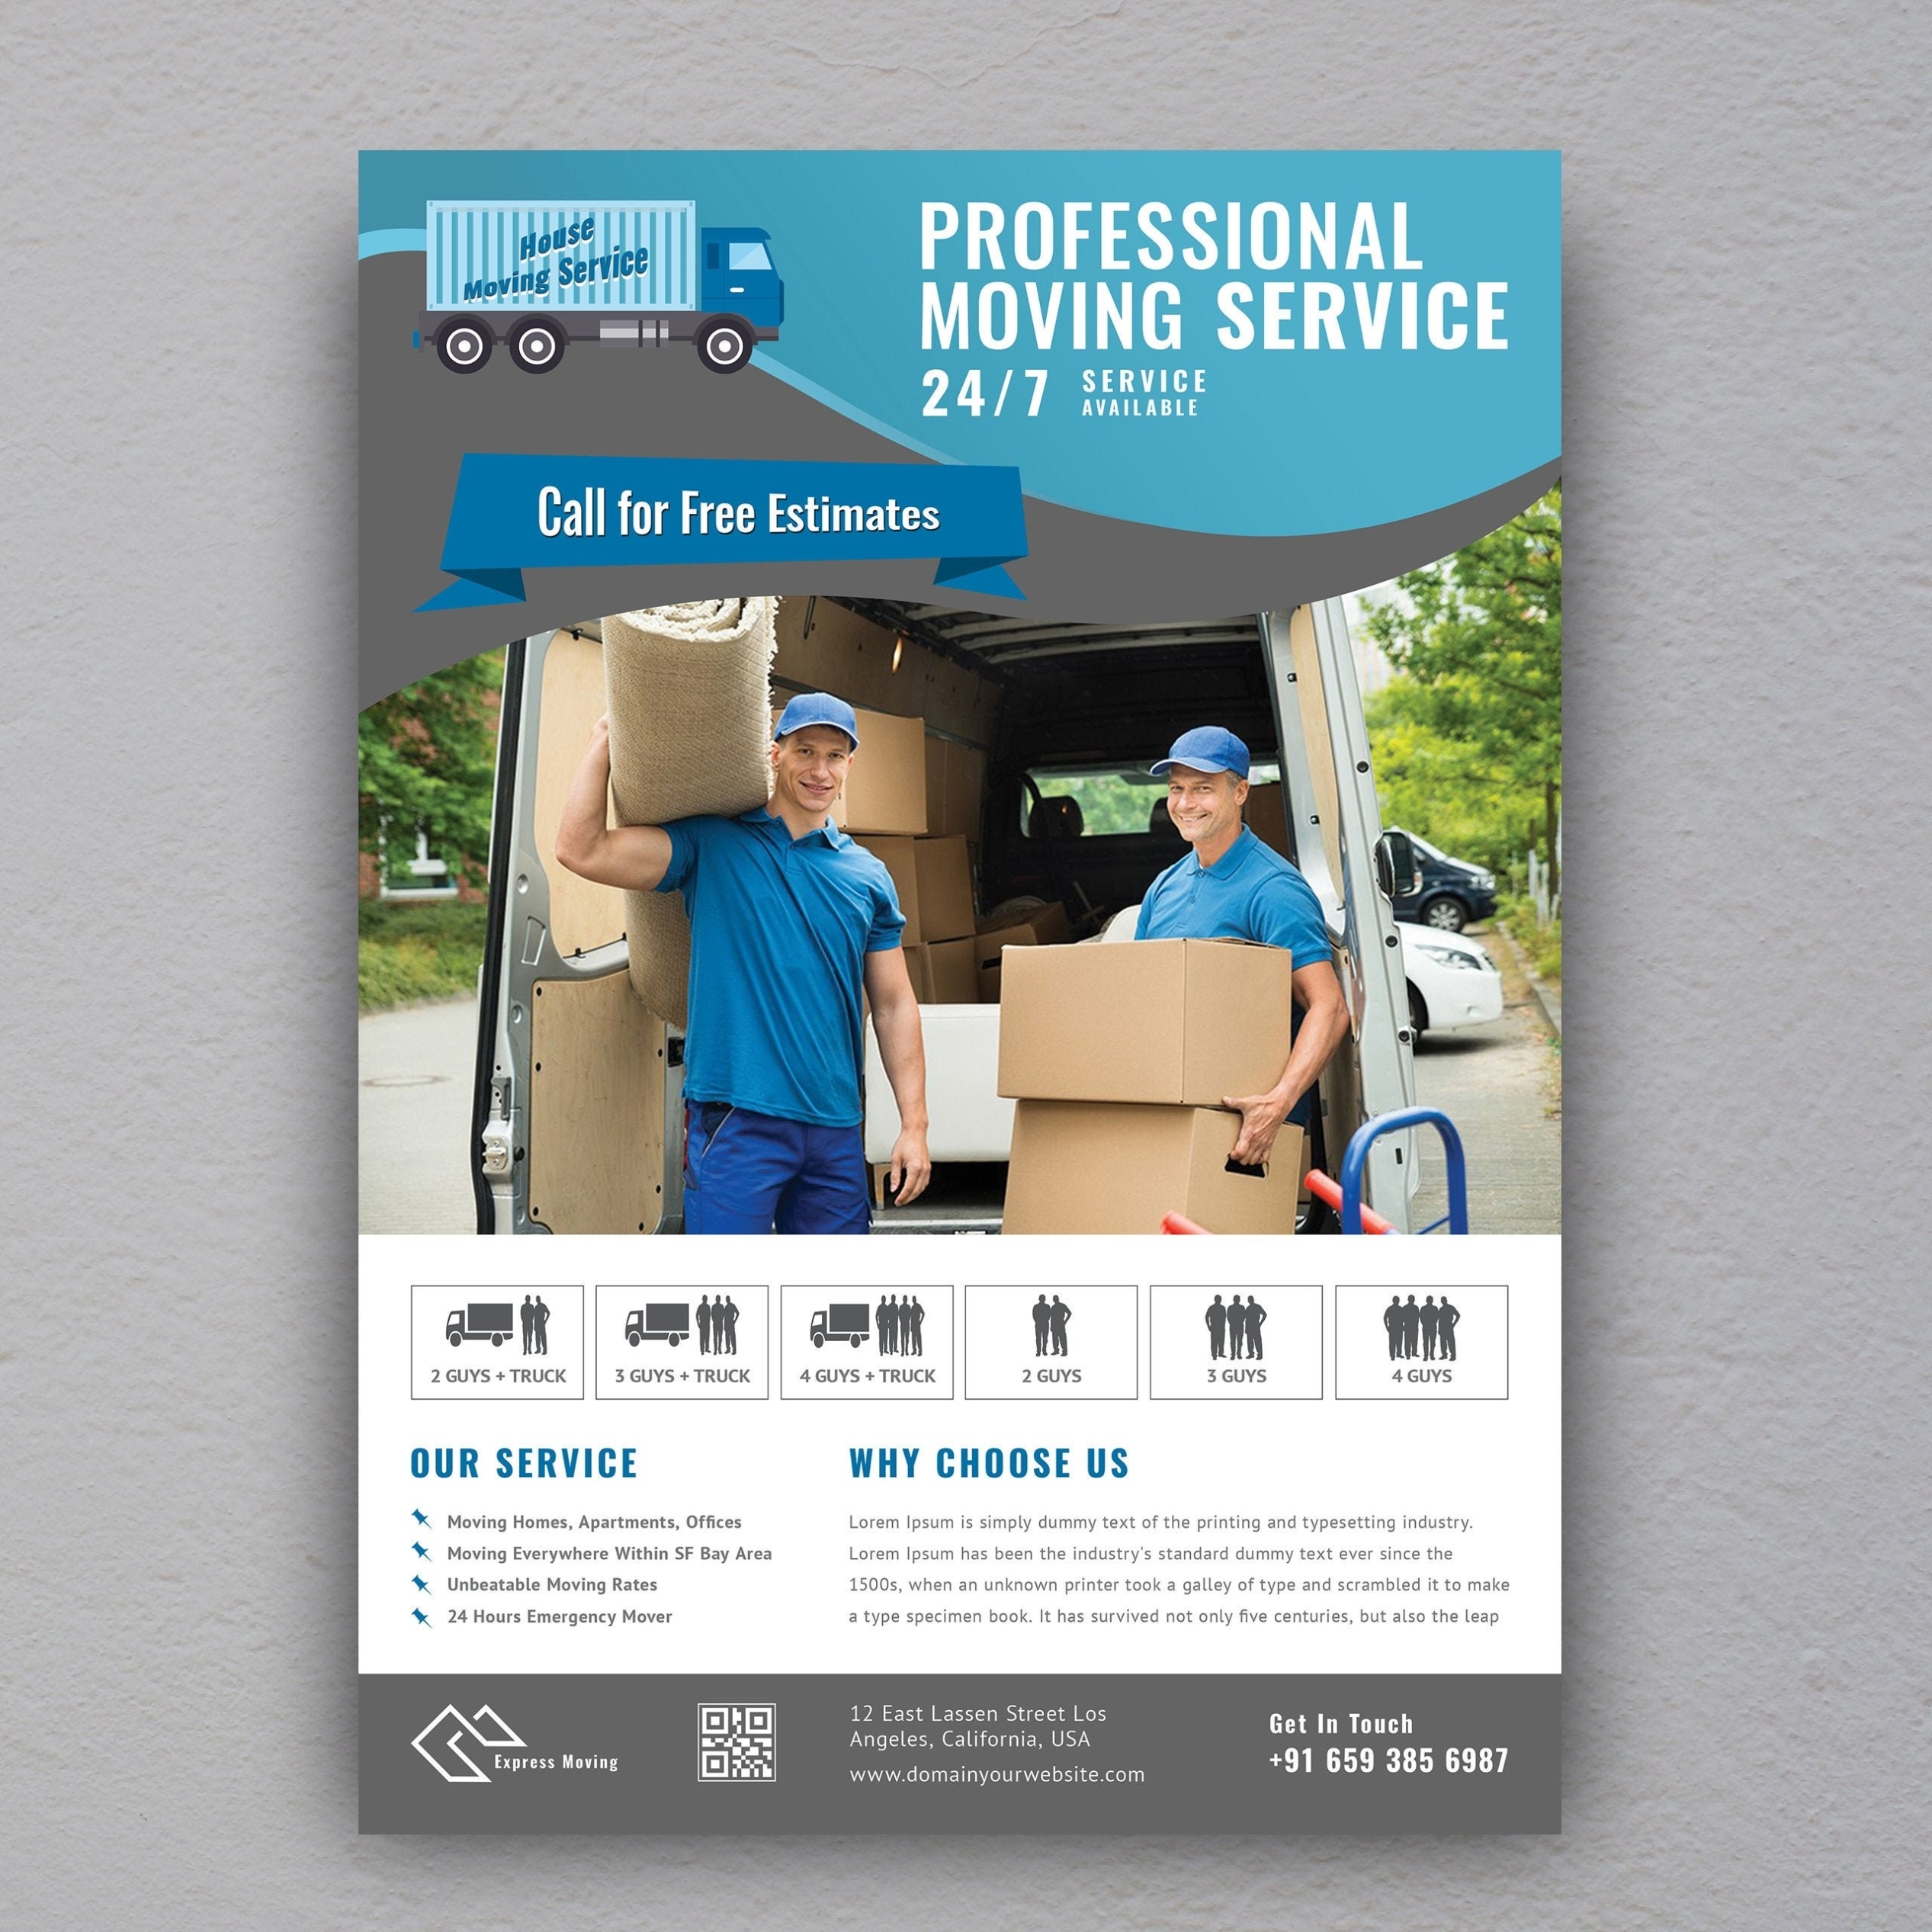 Moving Services Flyer Template Ms Word & Photoshop Files | Etsy With Moving Flyer Template